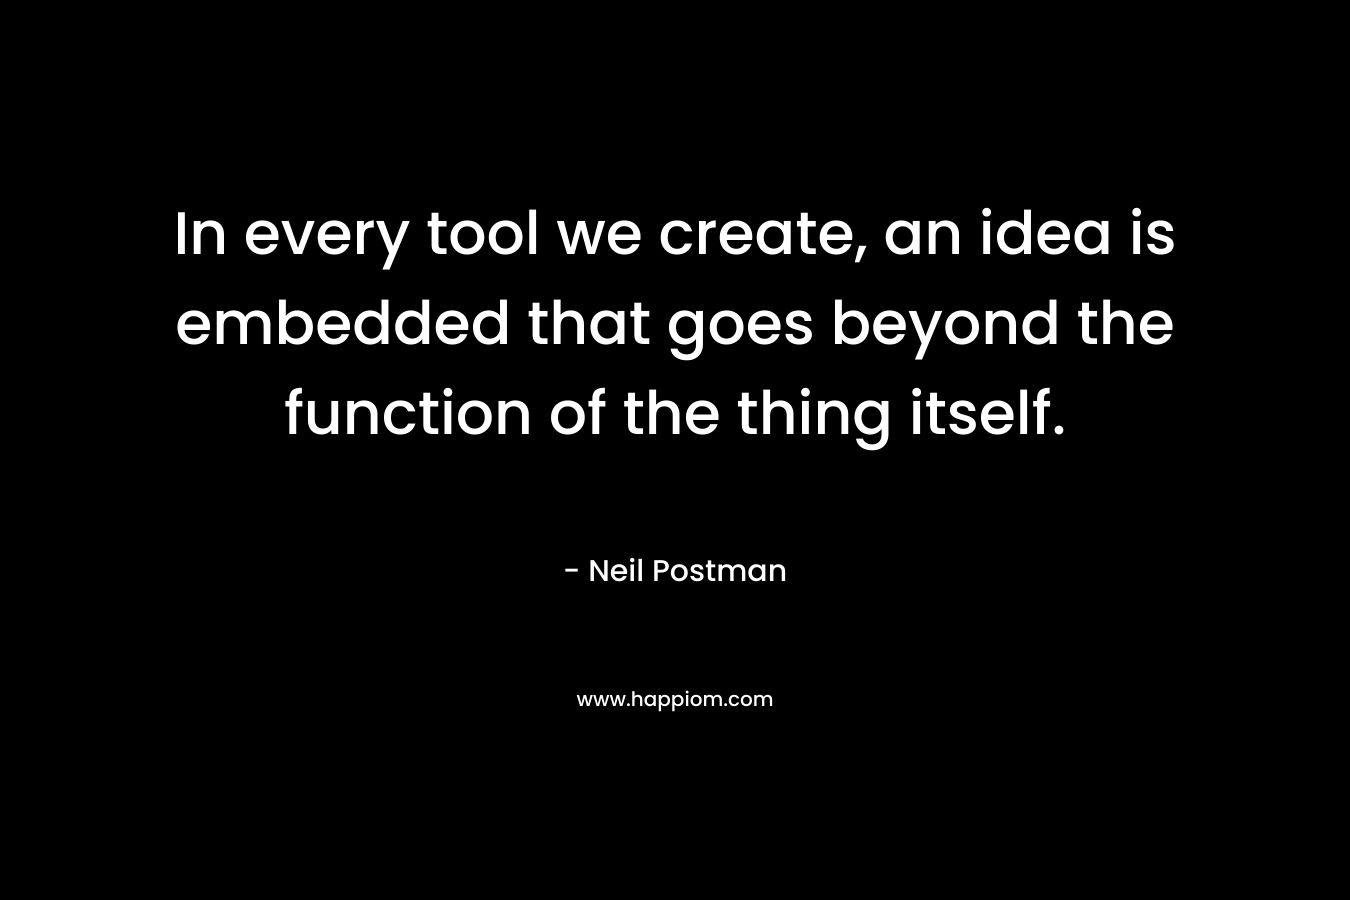 In every tool we create, an idea is embedded that goes beyond the function of the thing itself. – Neil Postman